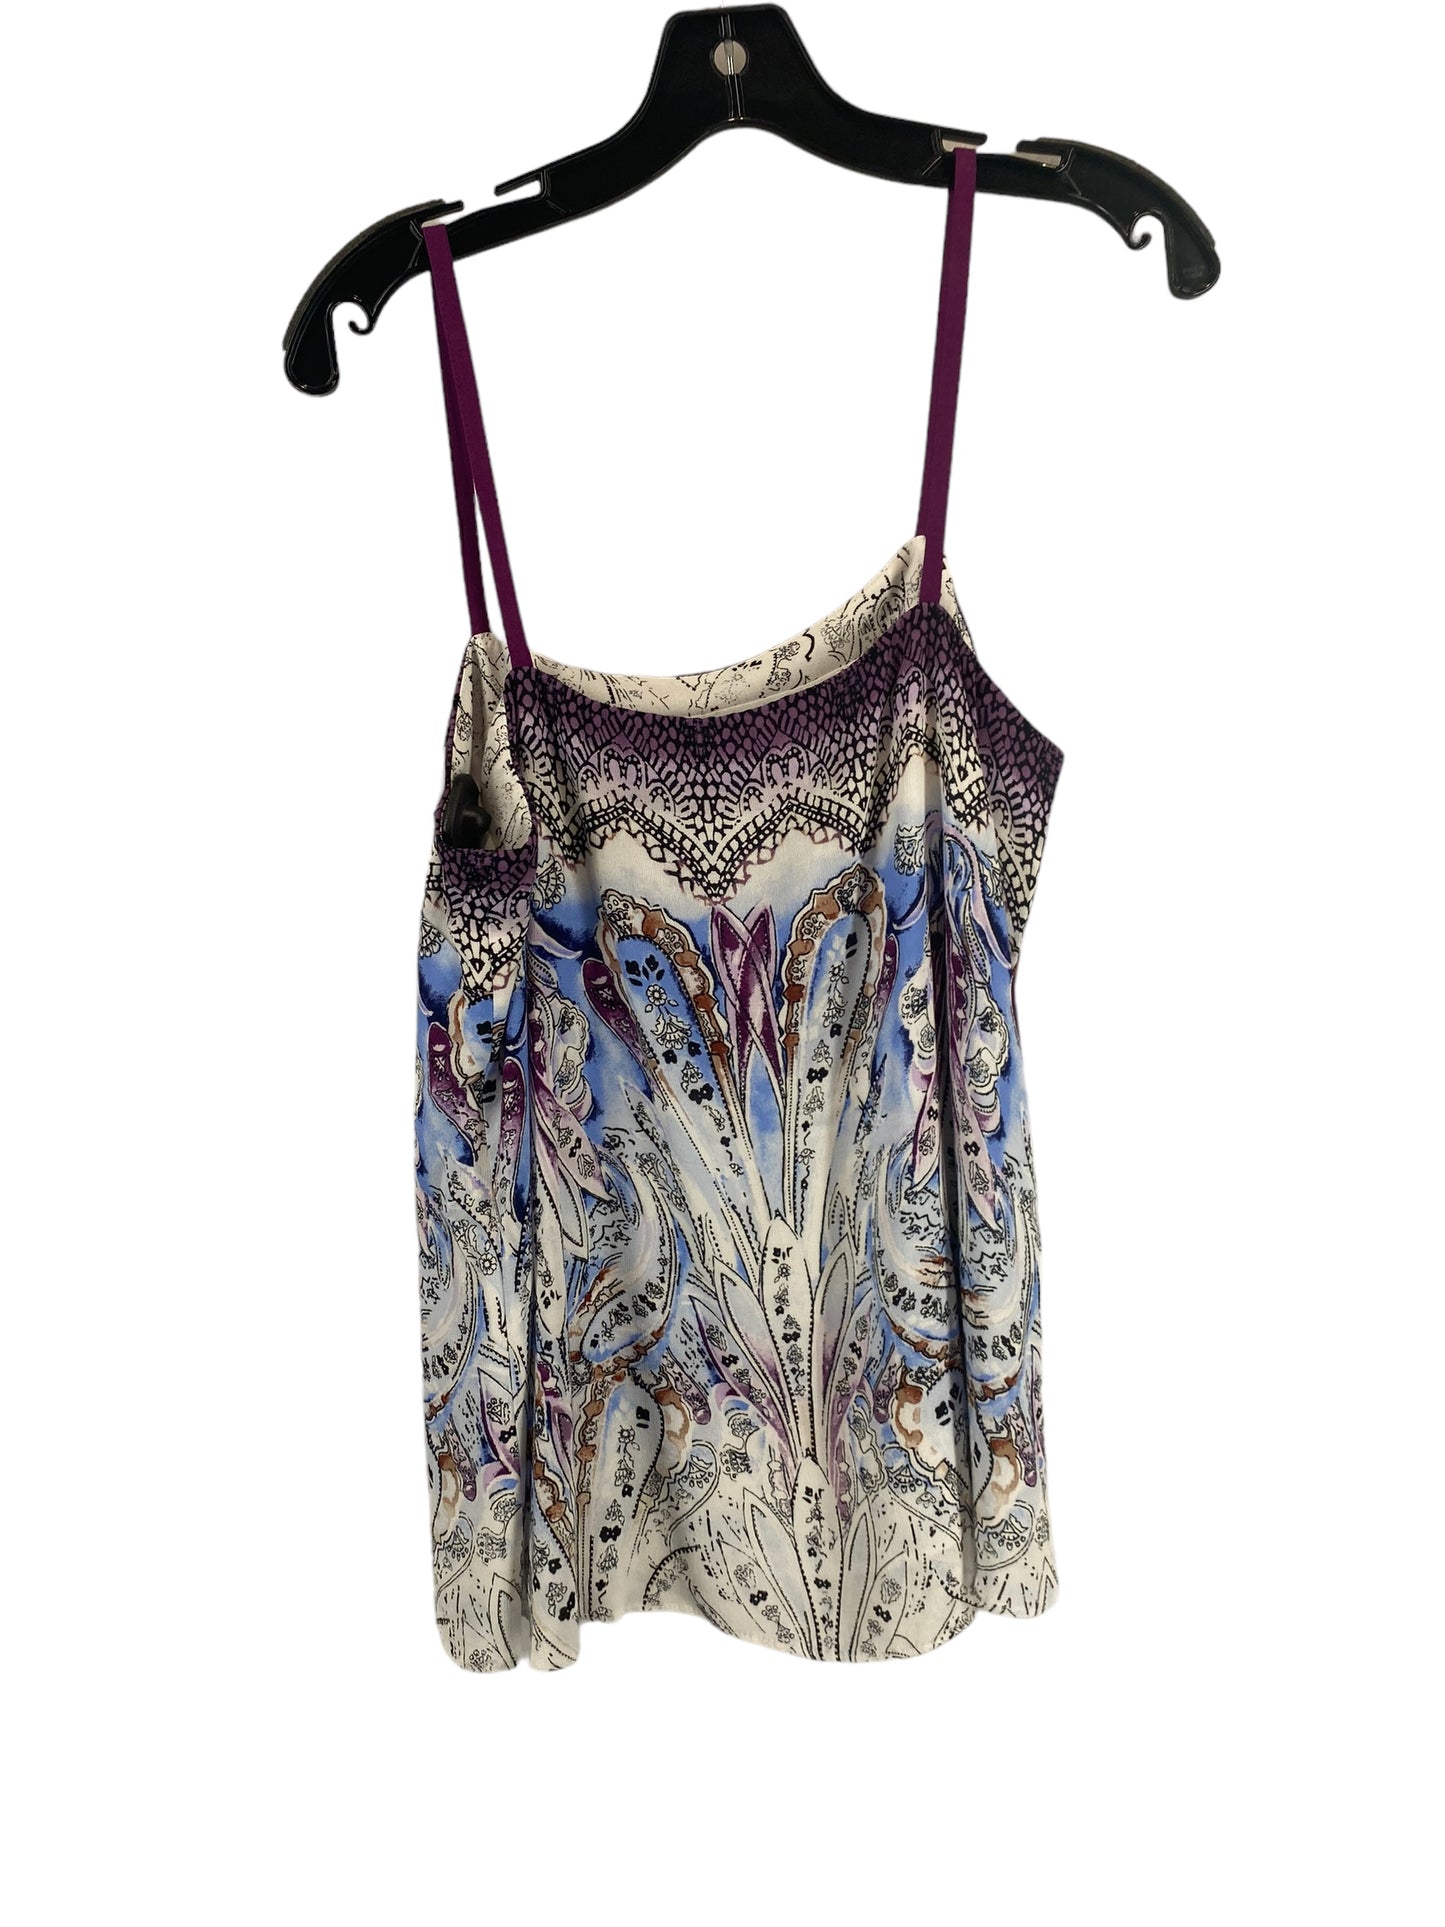 Top Cami By White House Black Market  Size: S